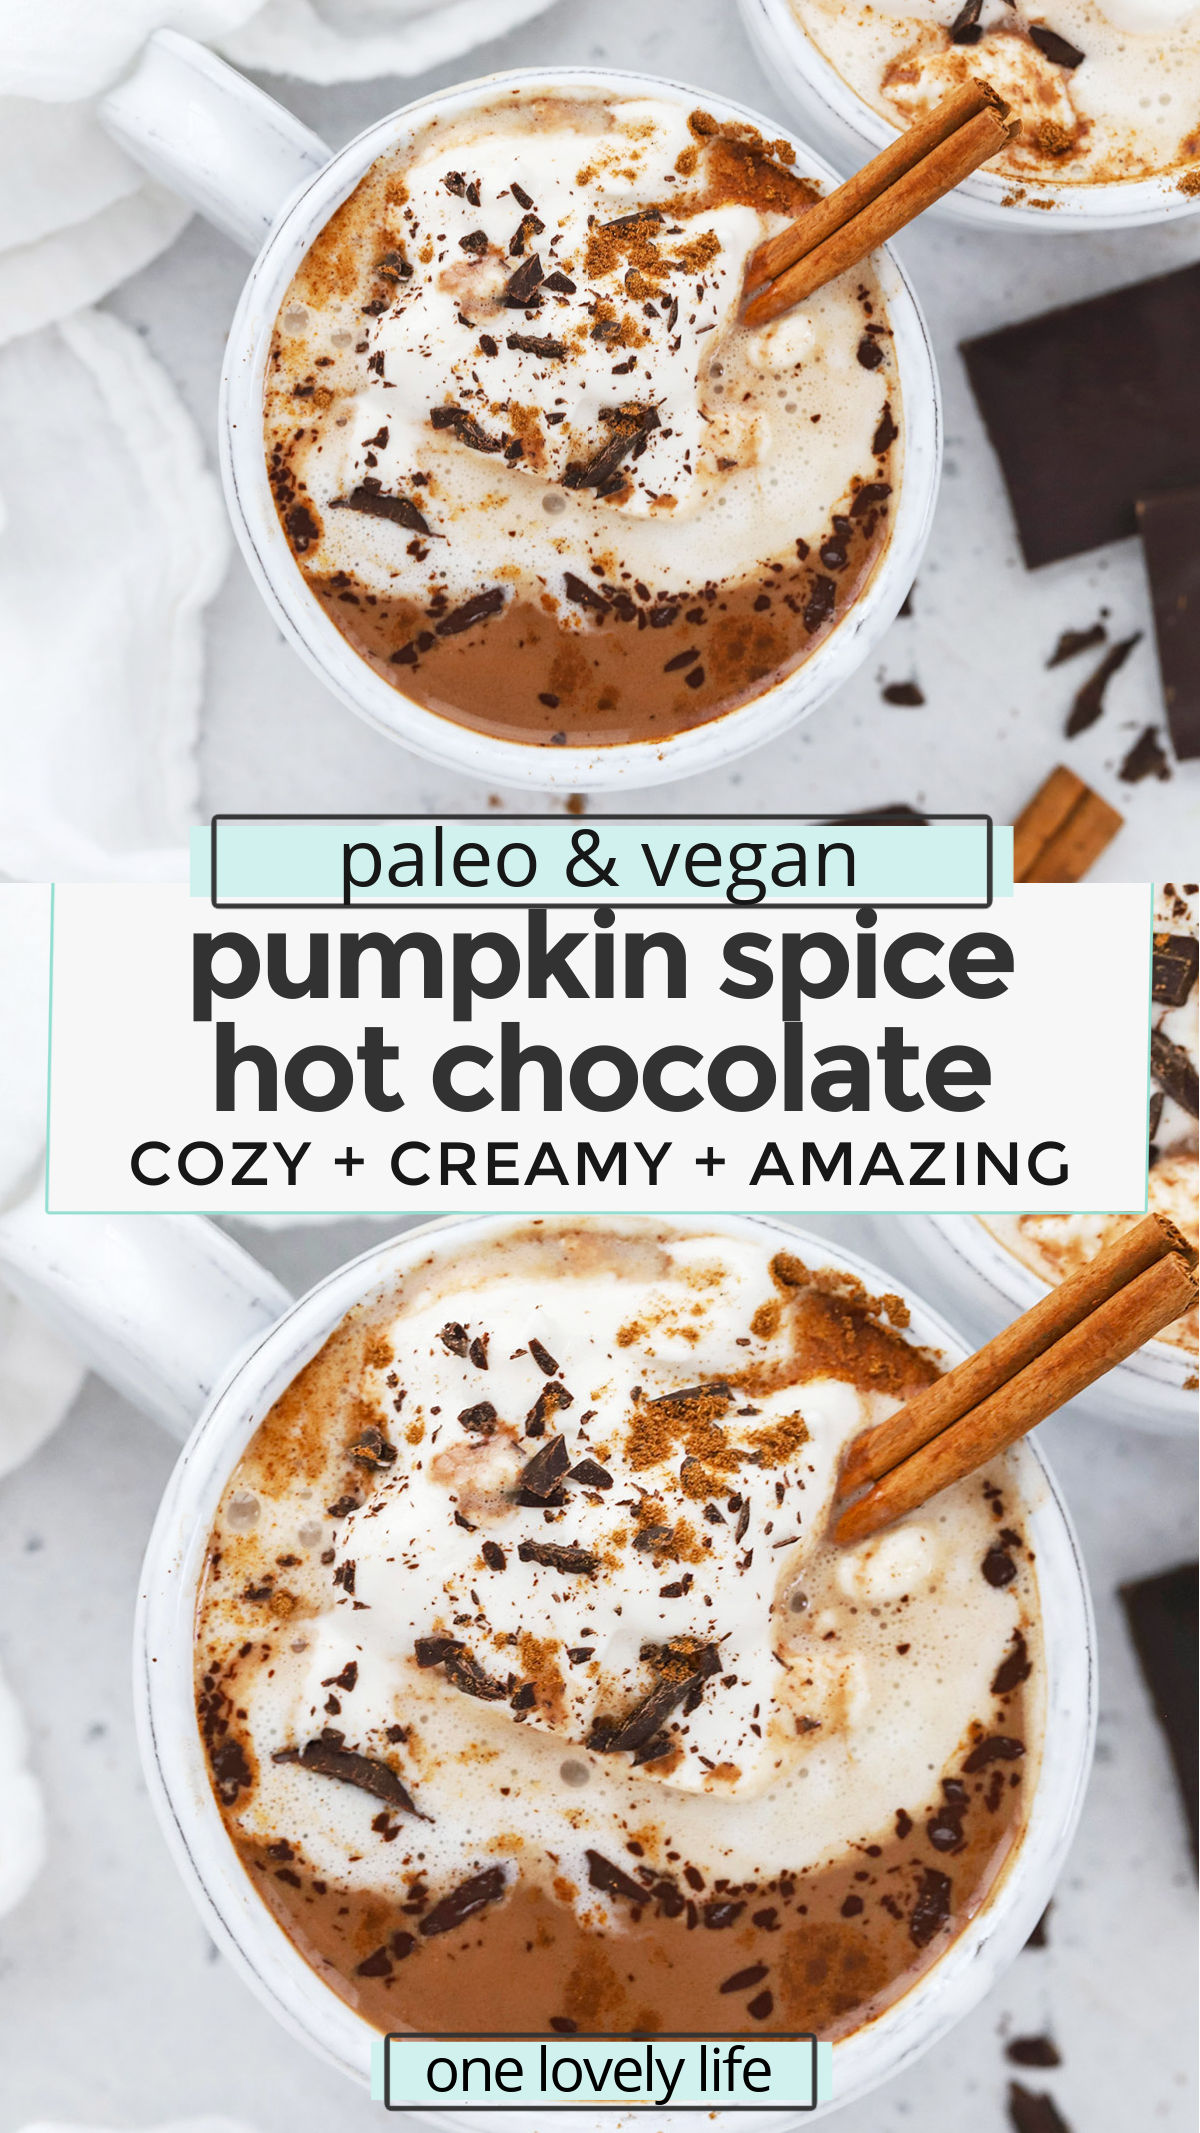 Vegan Pumpkin Spice Hot Chocolate - This dairy-free pumpkin spice hot chocolate is the perfect drink to cozy up with during cold weather. You'll love the rich, chocolatey flavor and warm kiss of spice. (Paleo-Friendly) // Pumpkin Spice Hot Cocoa Recipe // Vegan Hot Chocolate Recipe // Dairy Free Hot Chocolate Recipe // Pumpkin Hot Chocolate // Cinnamon Hot Chocolate